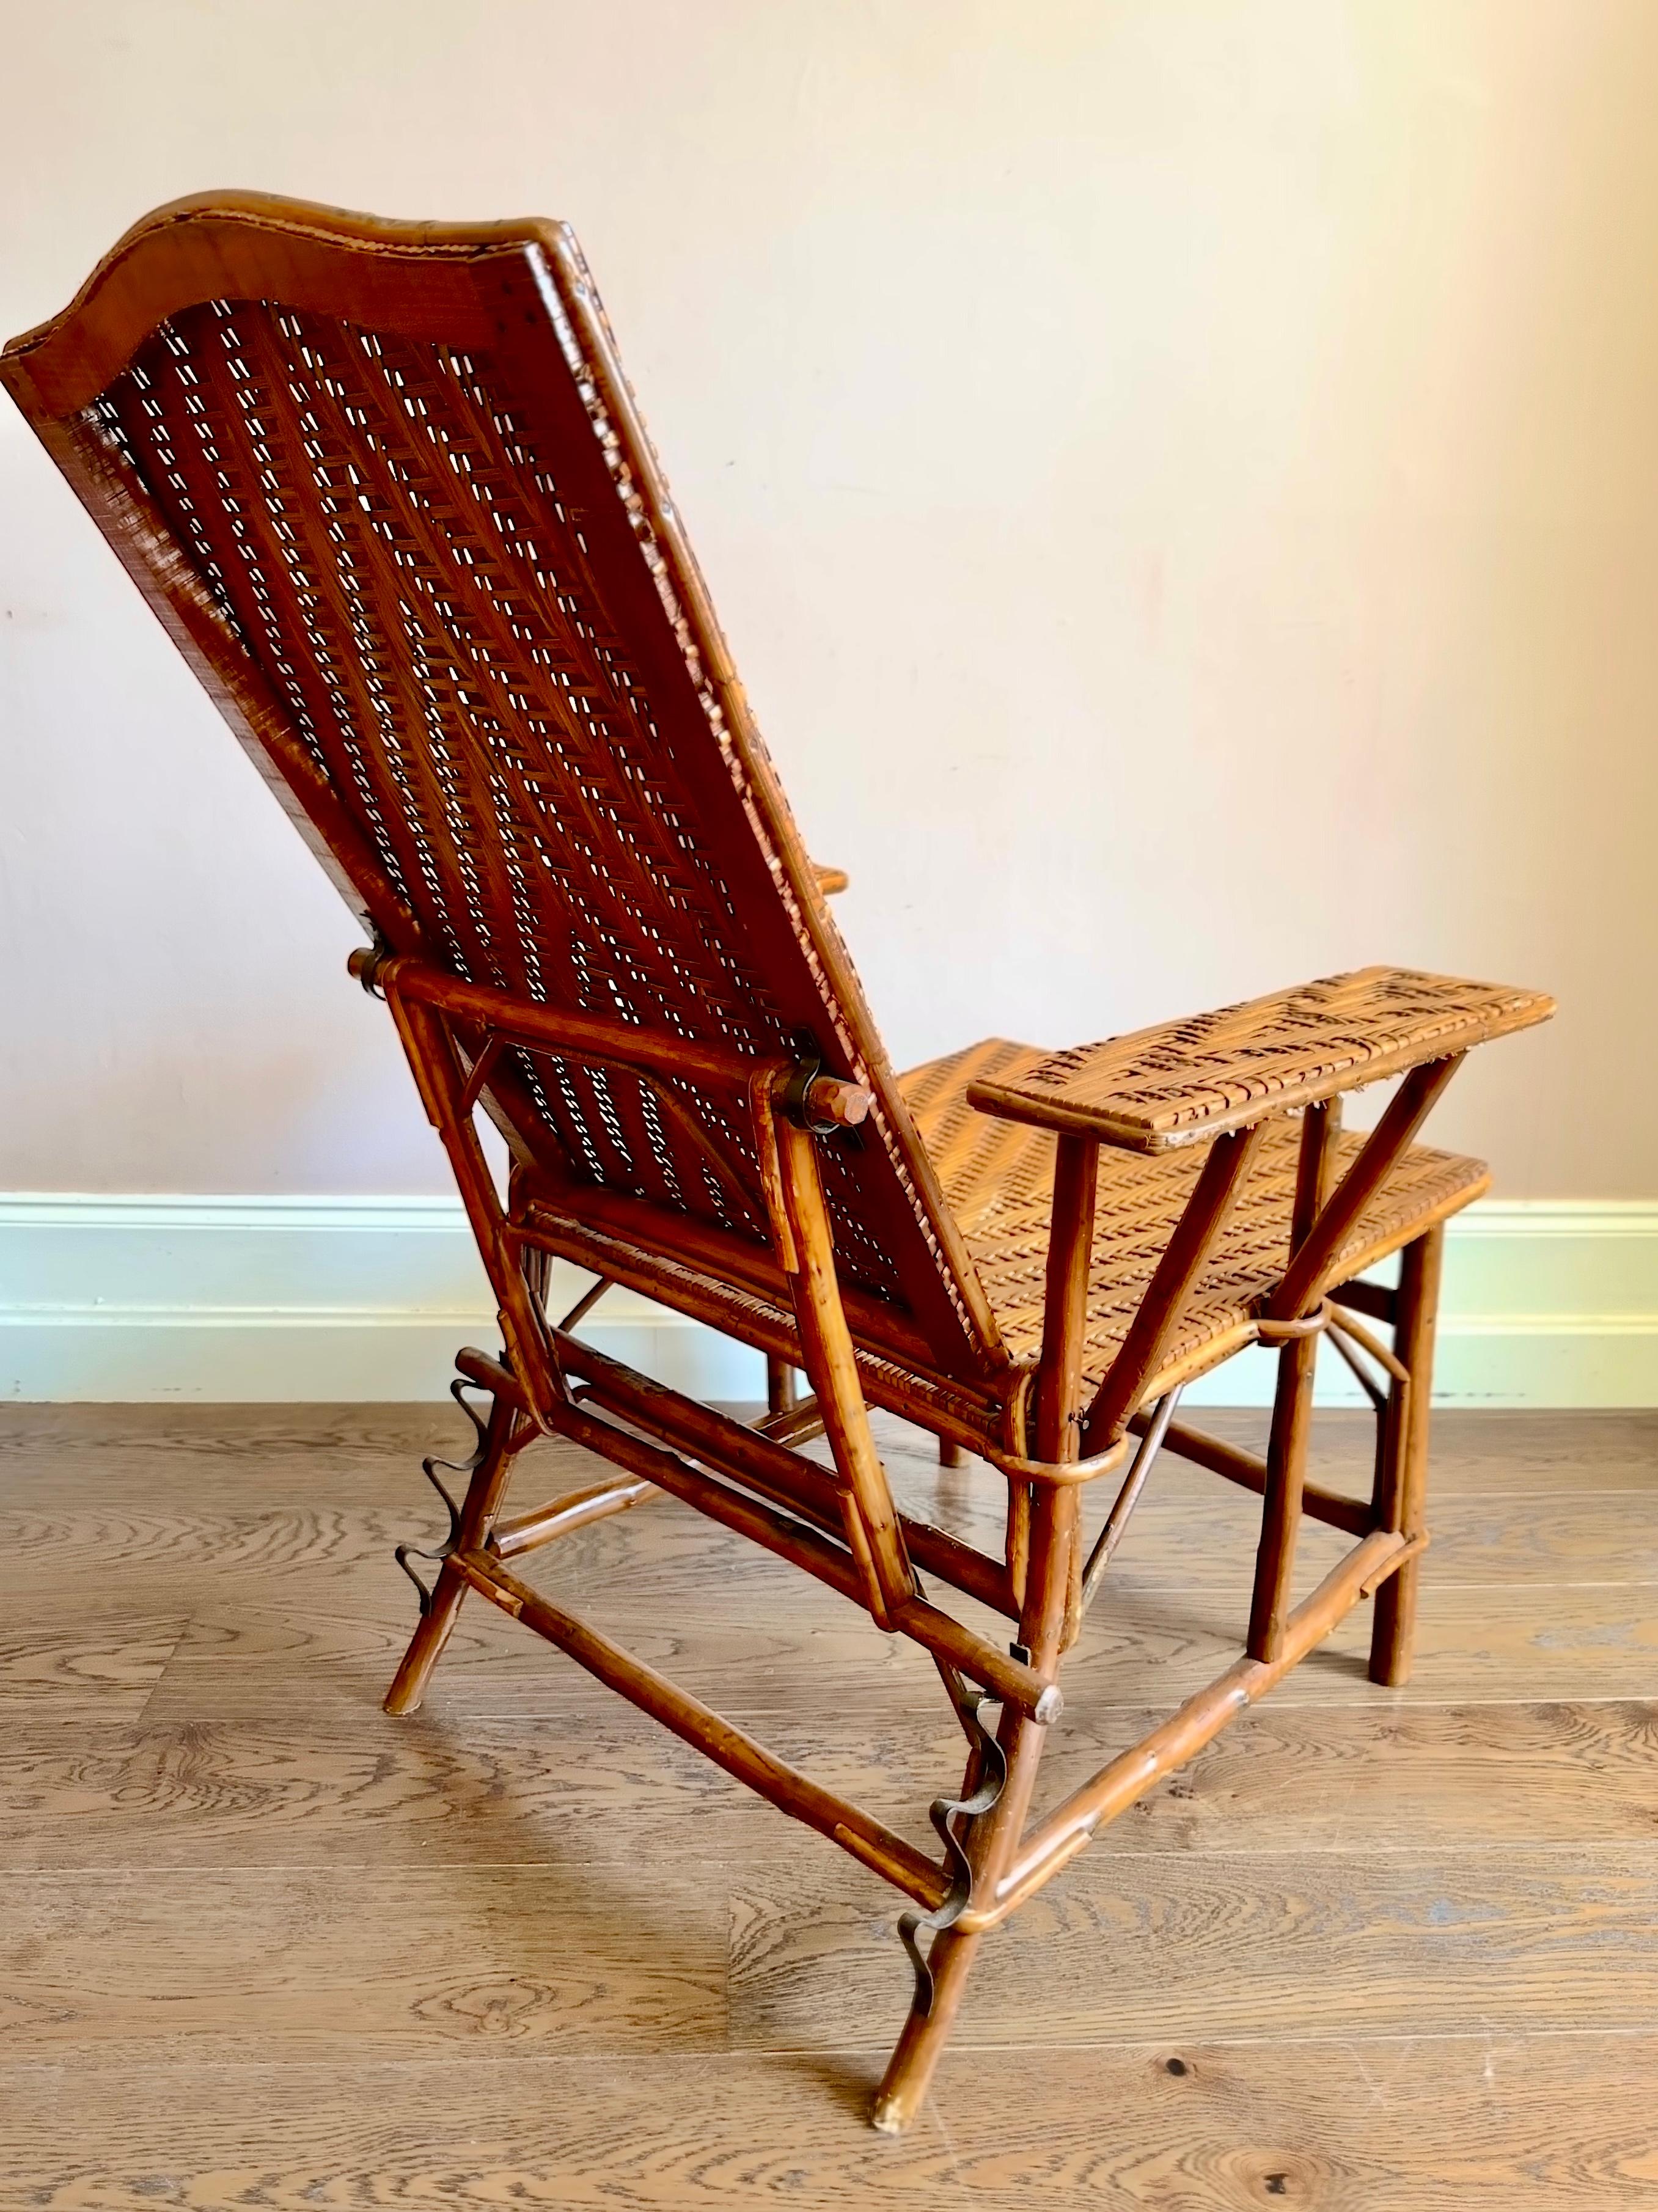 Mid-20th Century 1930s French Rattan & Wood Chaise Longue Sun Lounger